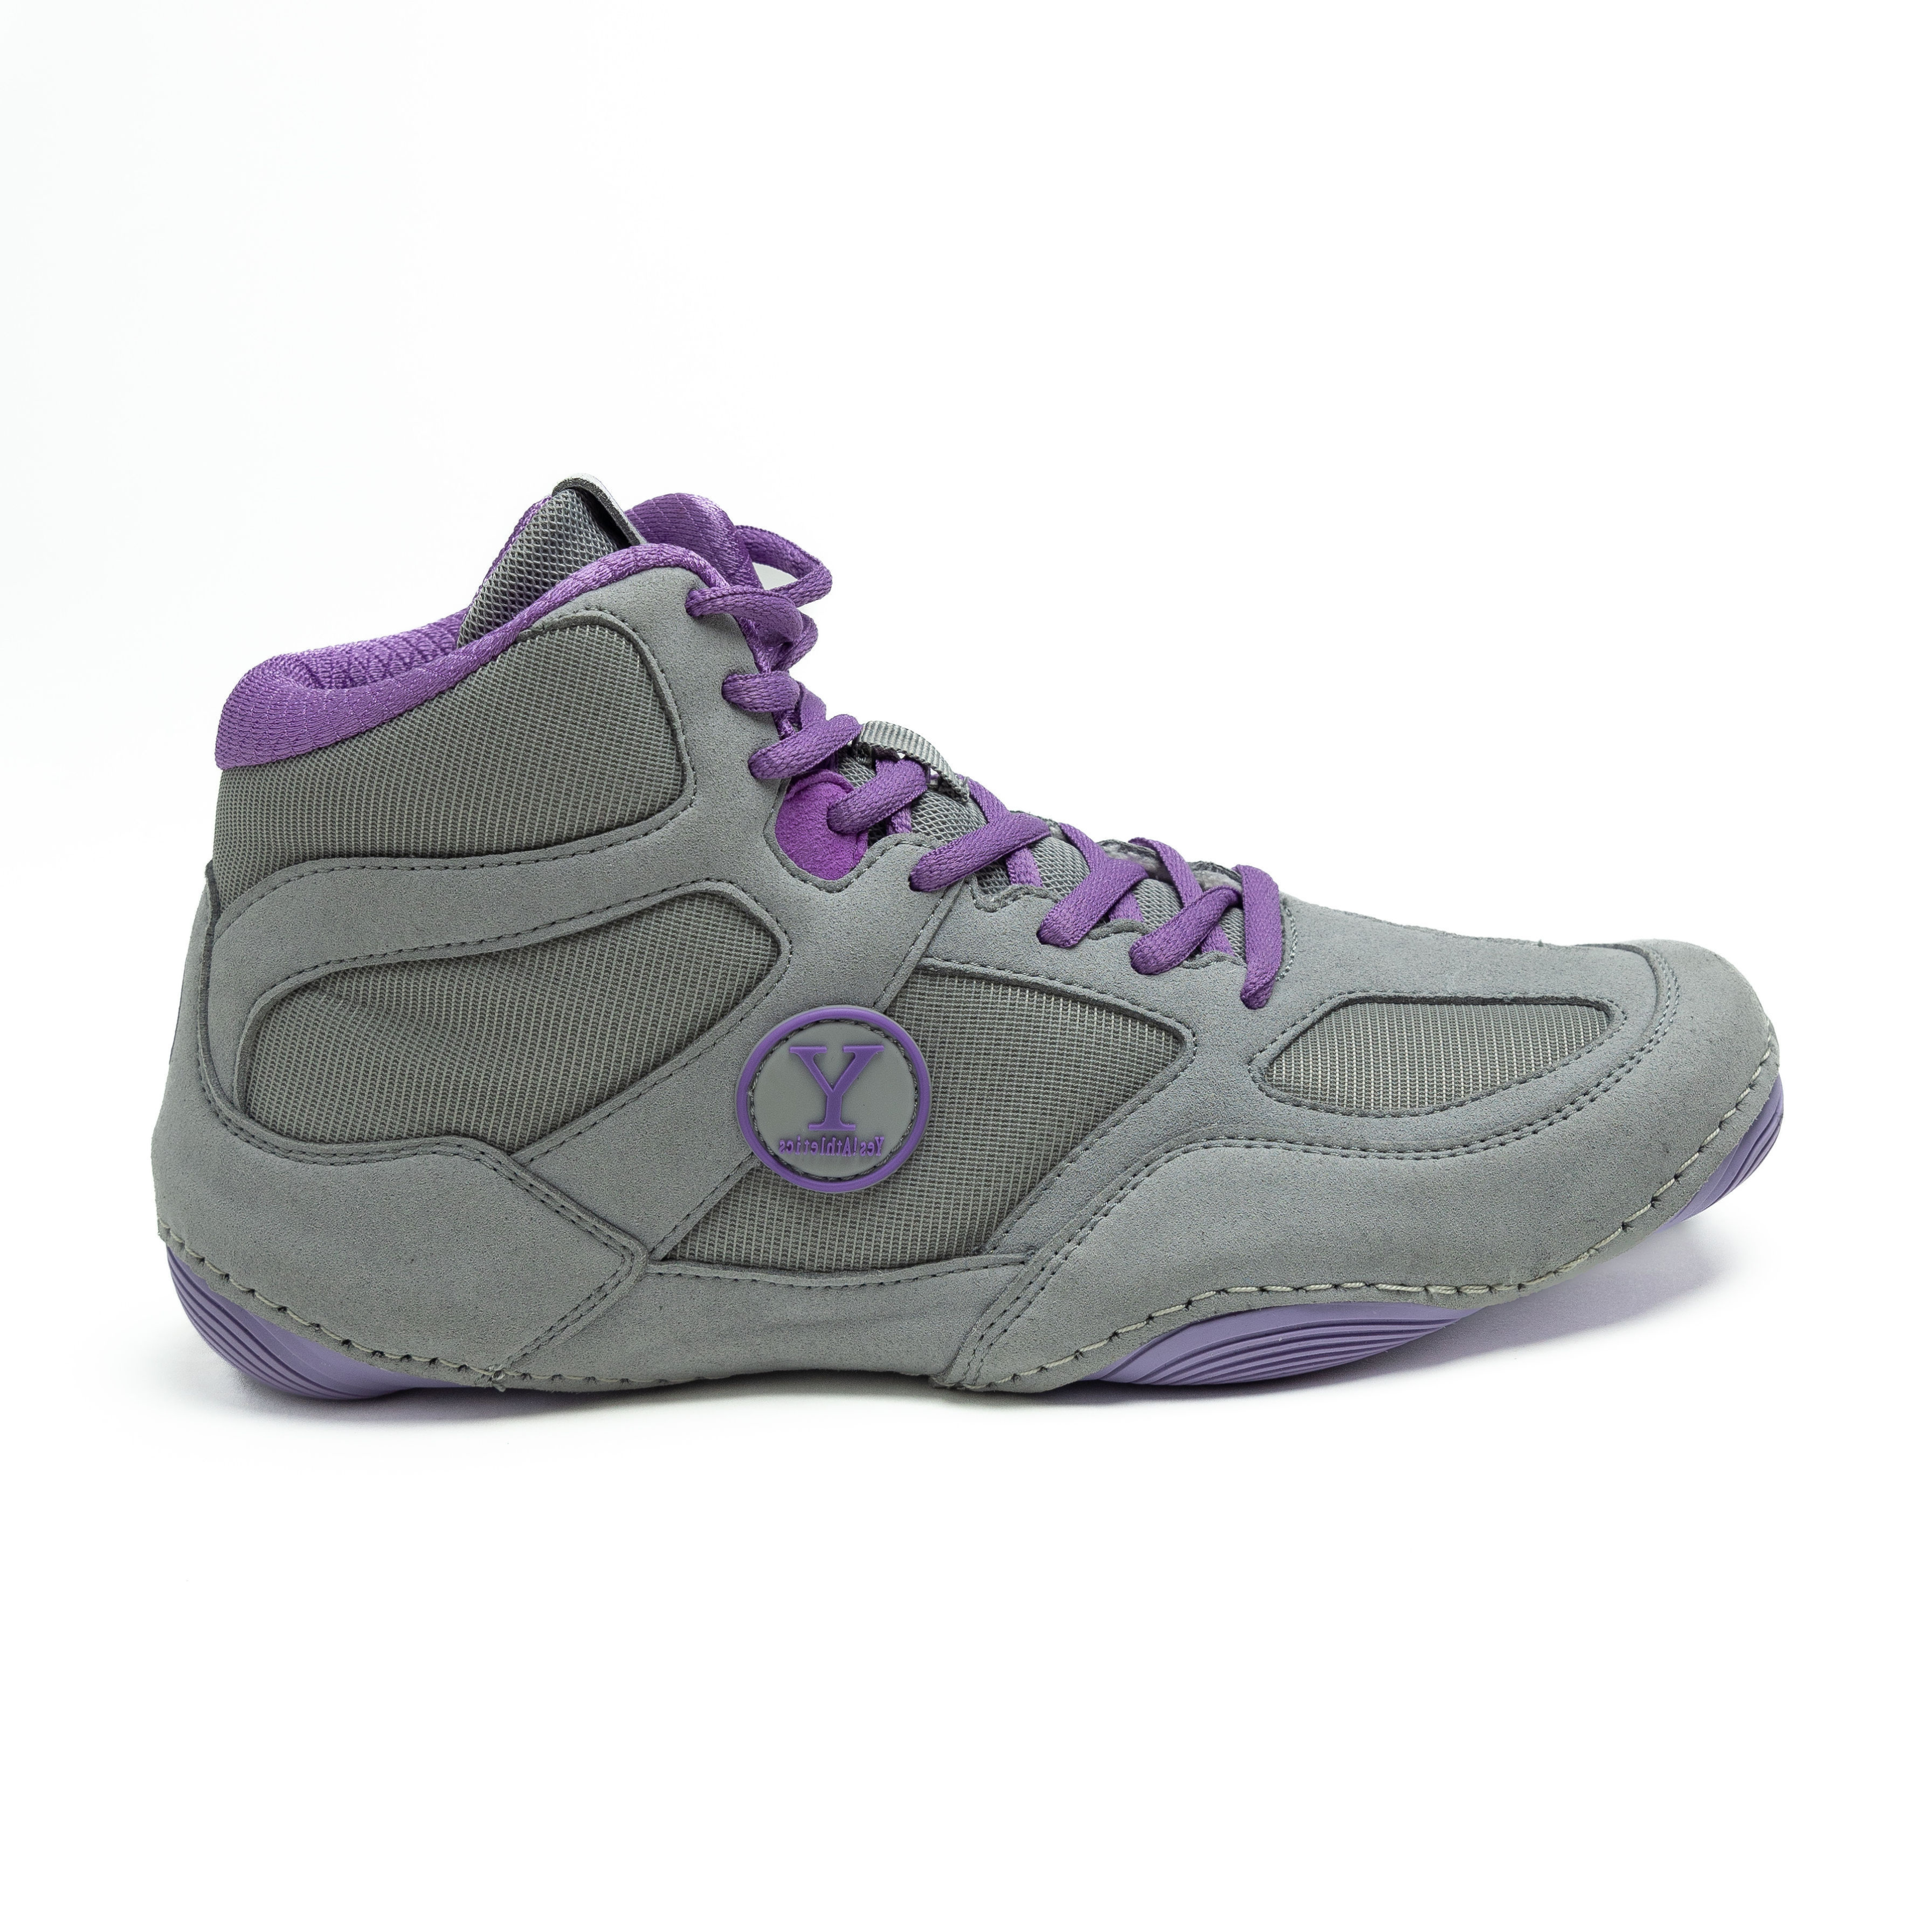 Grey and purple Yes! Athletics Defiant2 womens wrestling shoe